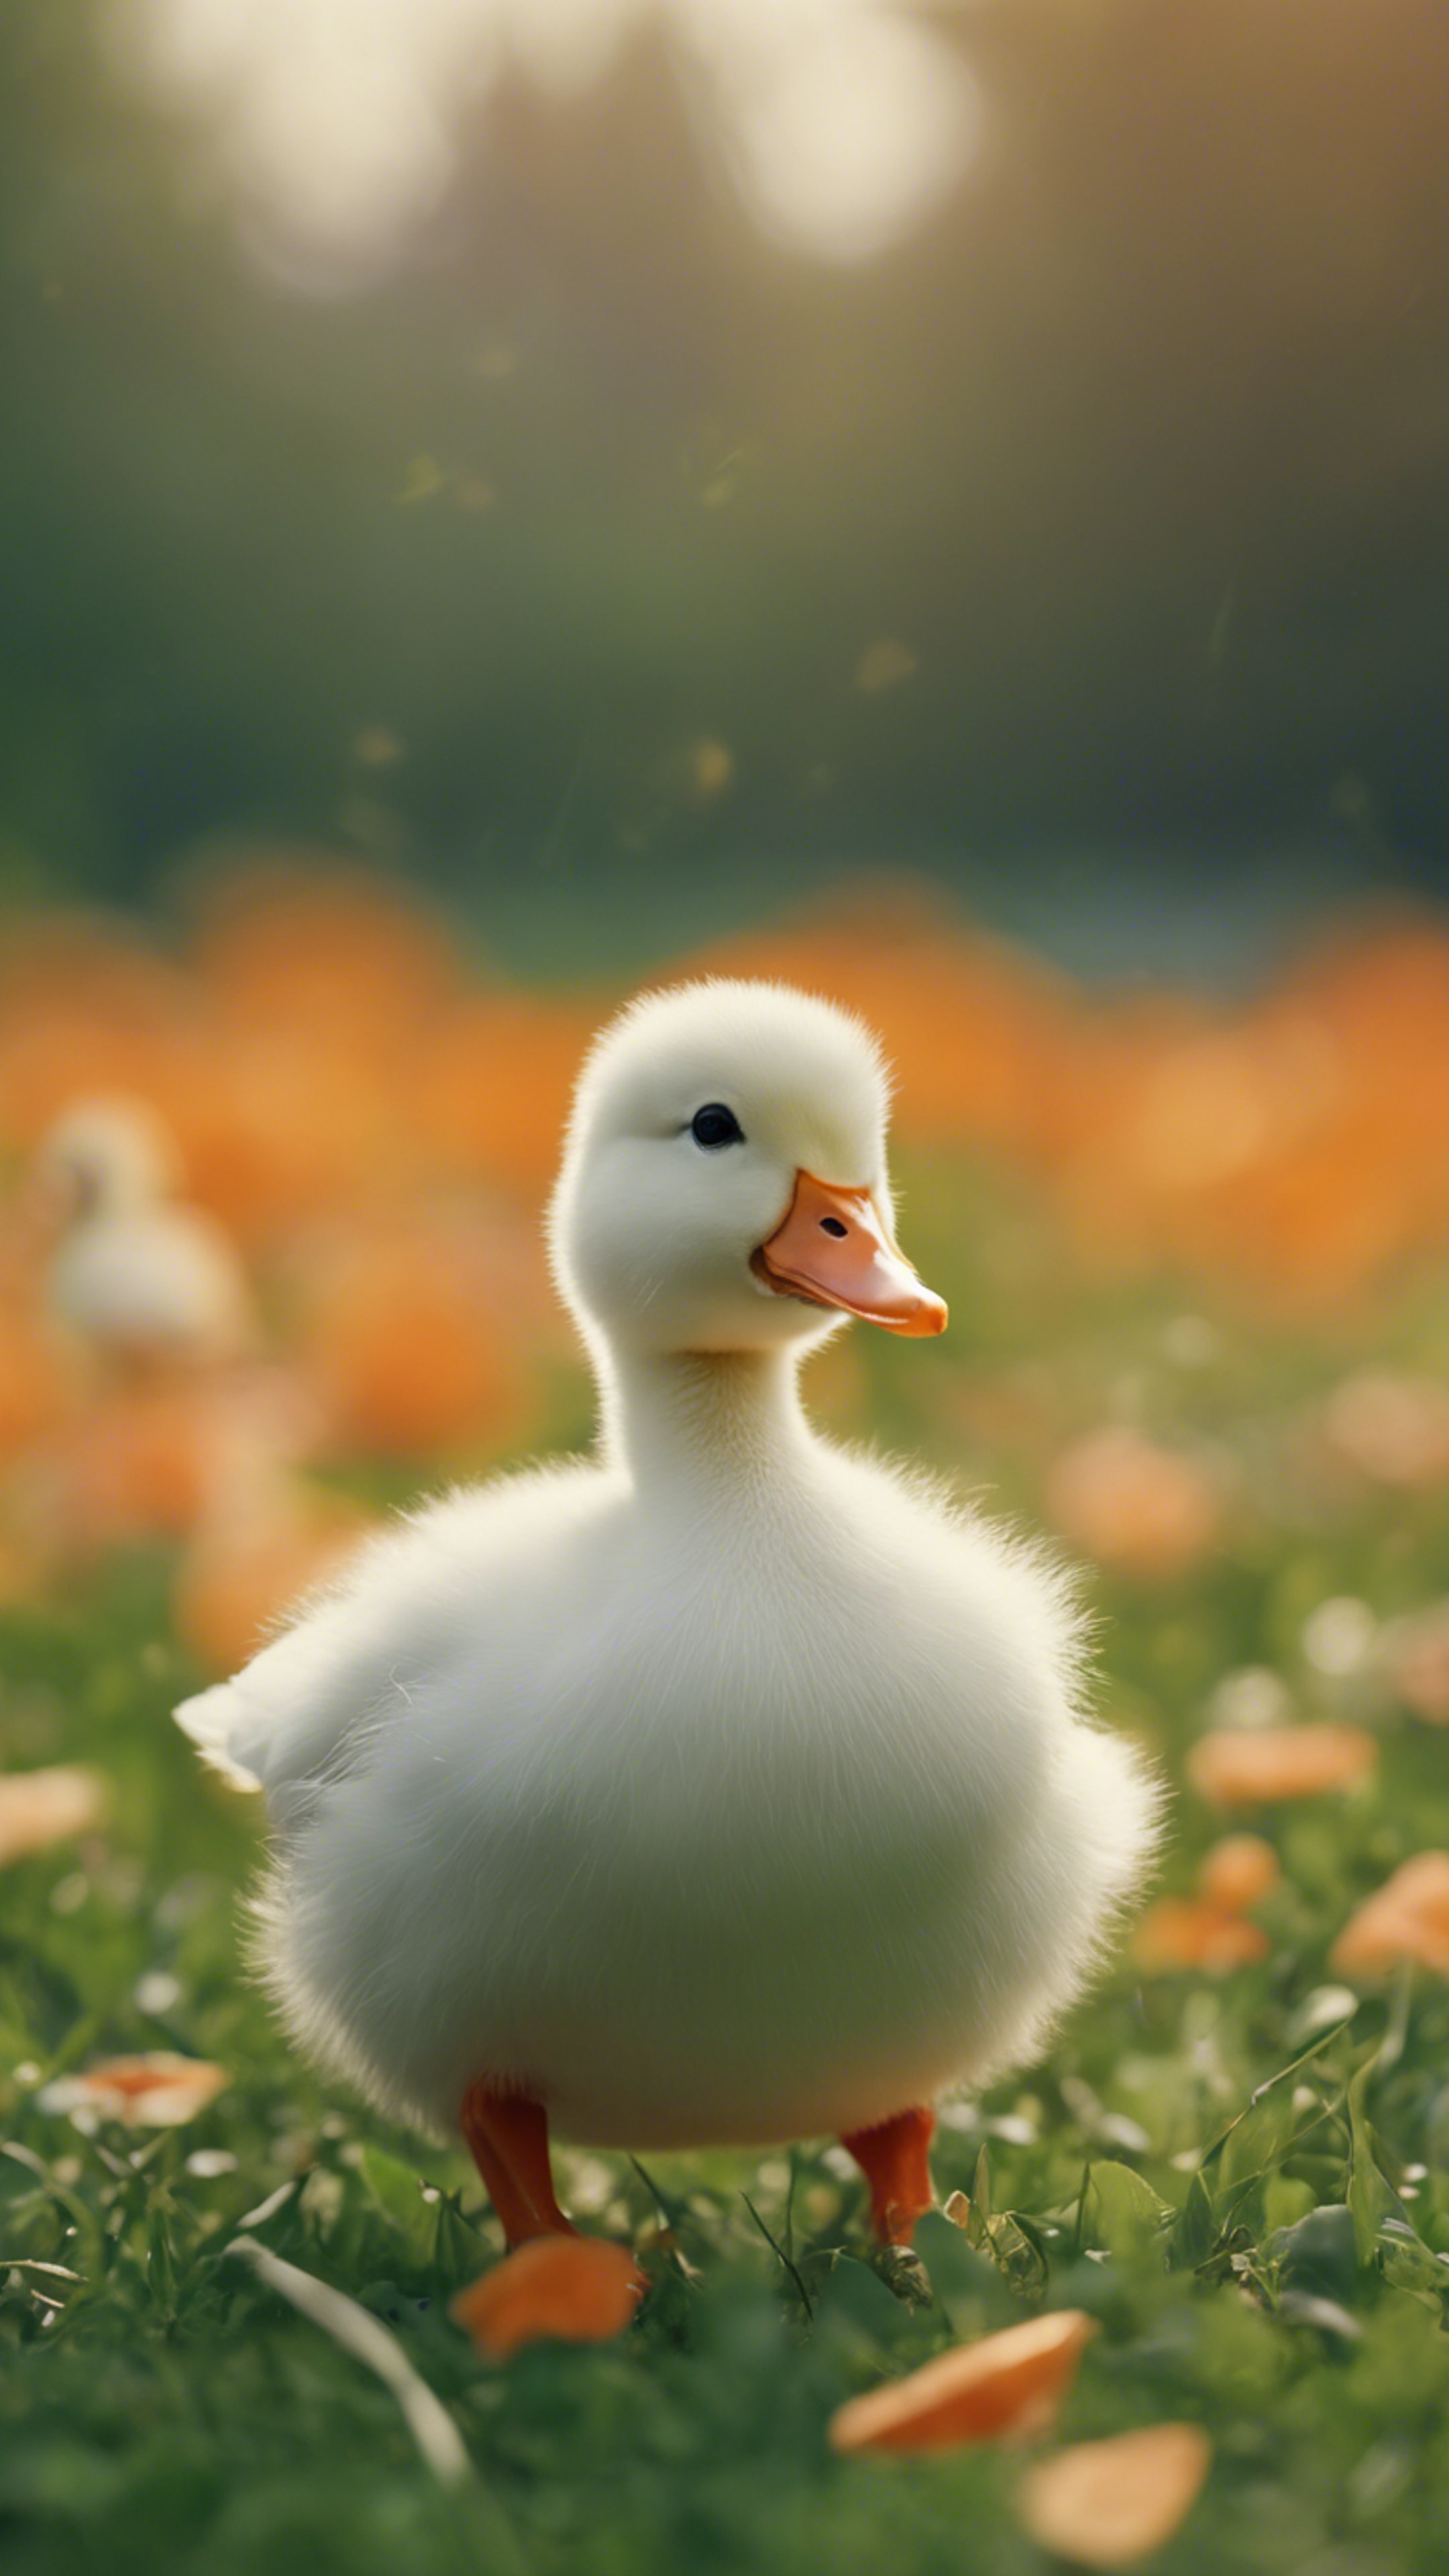 An adorable fluffy white duck with a bright orange bill is waddling happily across a green meadow. Обои[c976b0c80c1040dead0f]